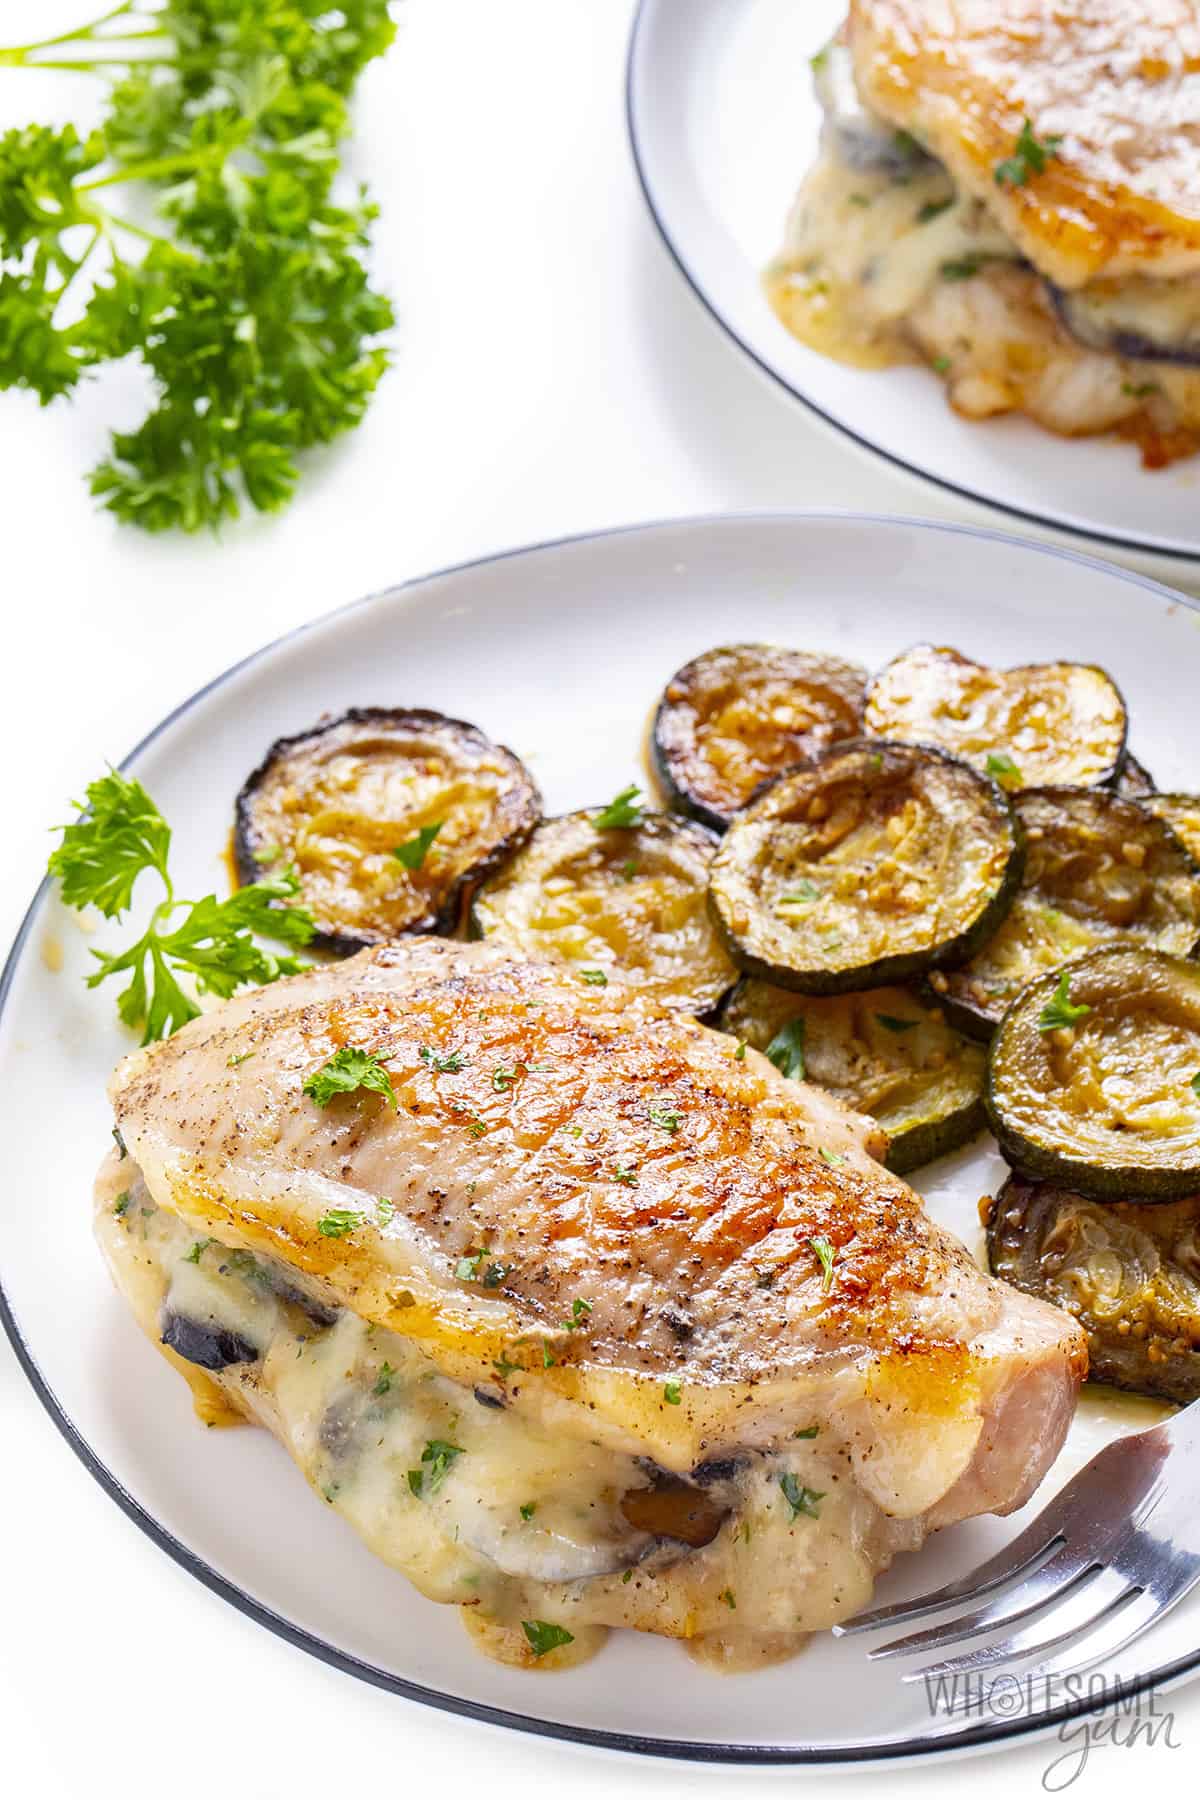 Plates of baked stuffed pork chops with side of sauteed zucchini.